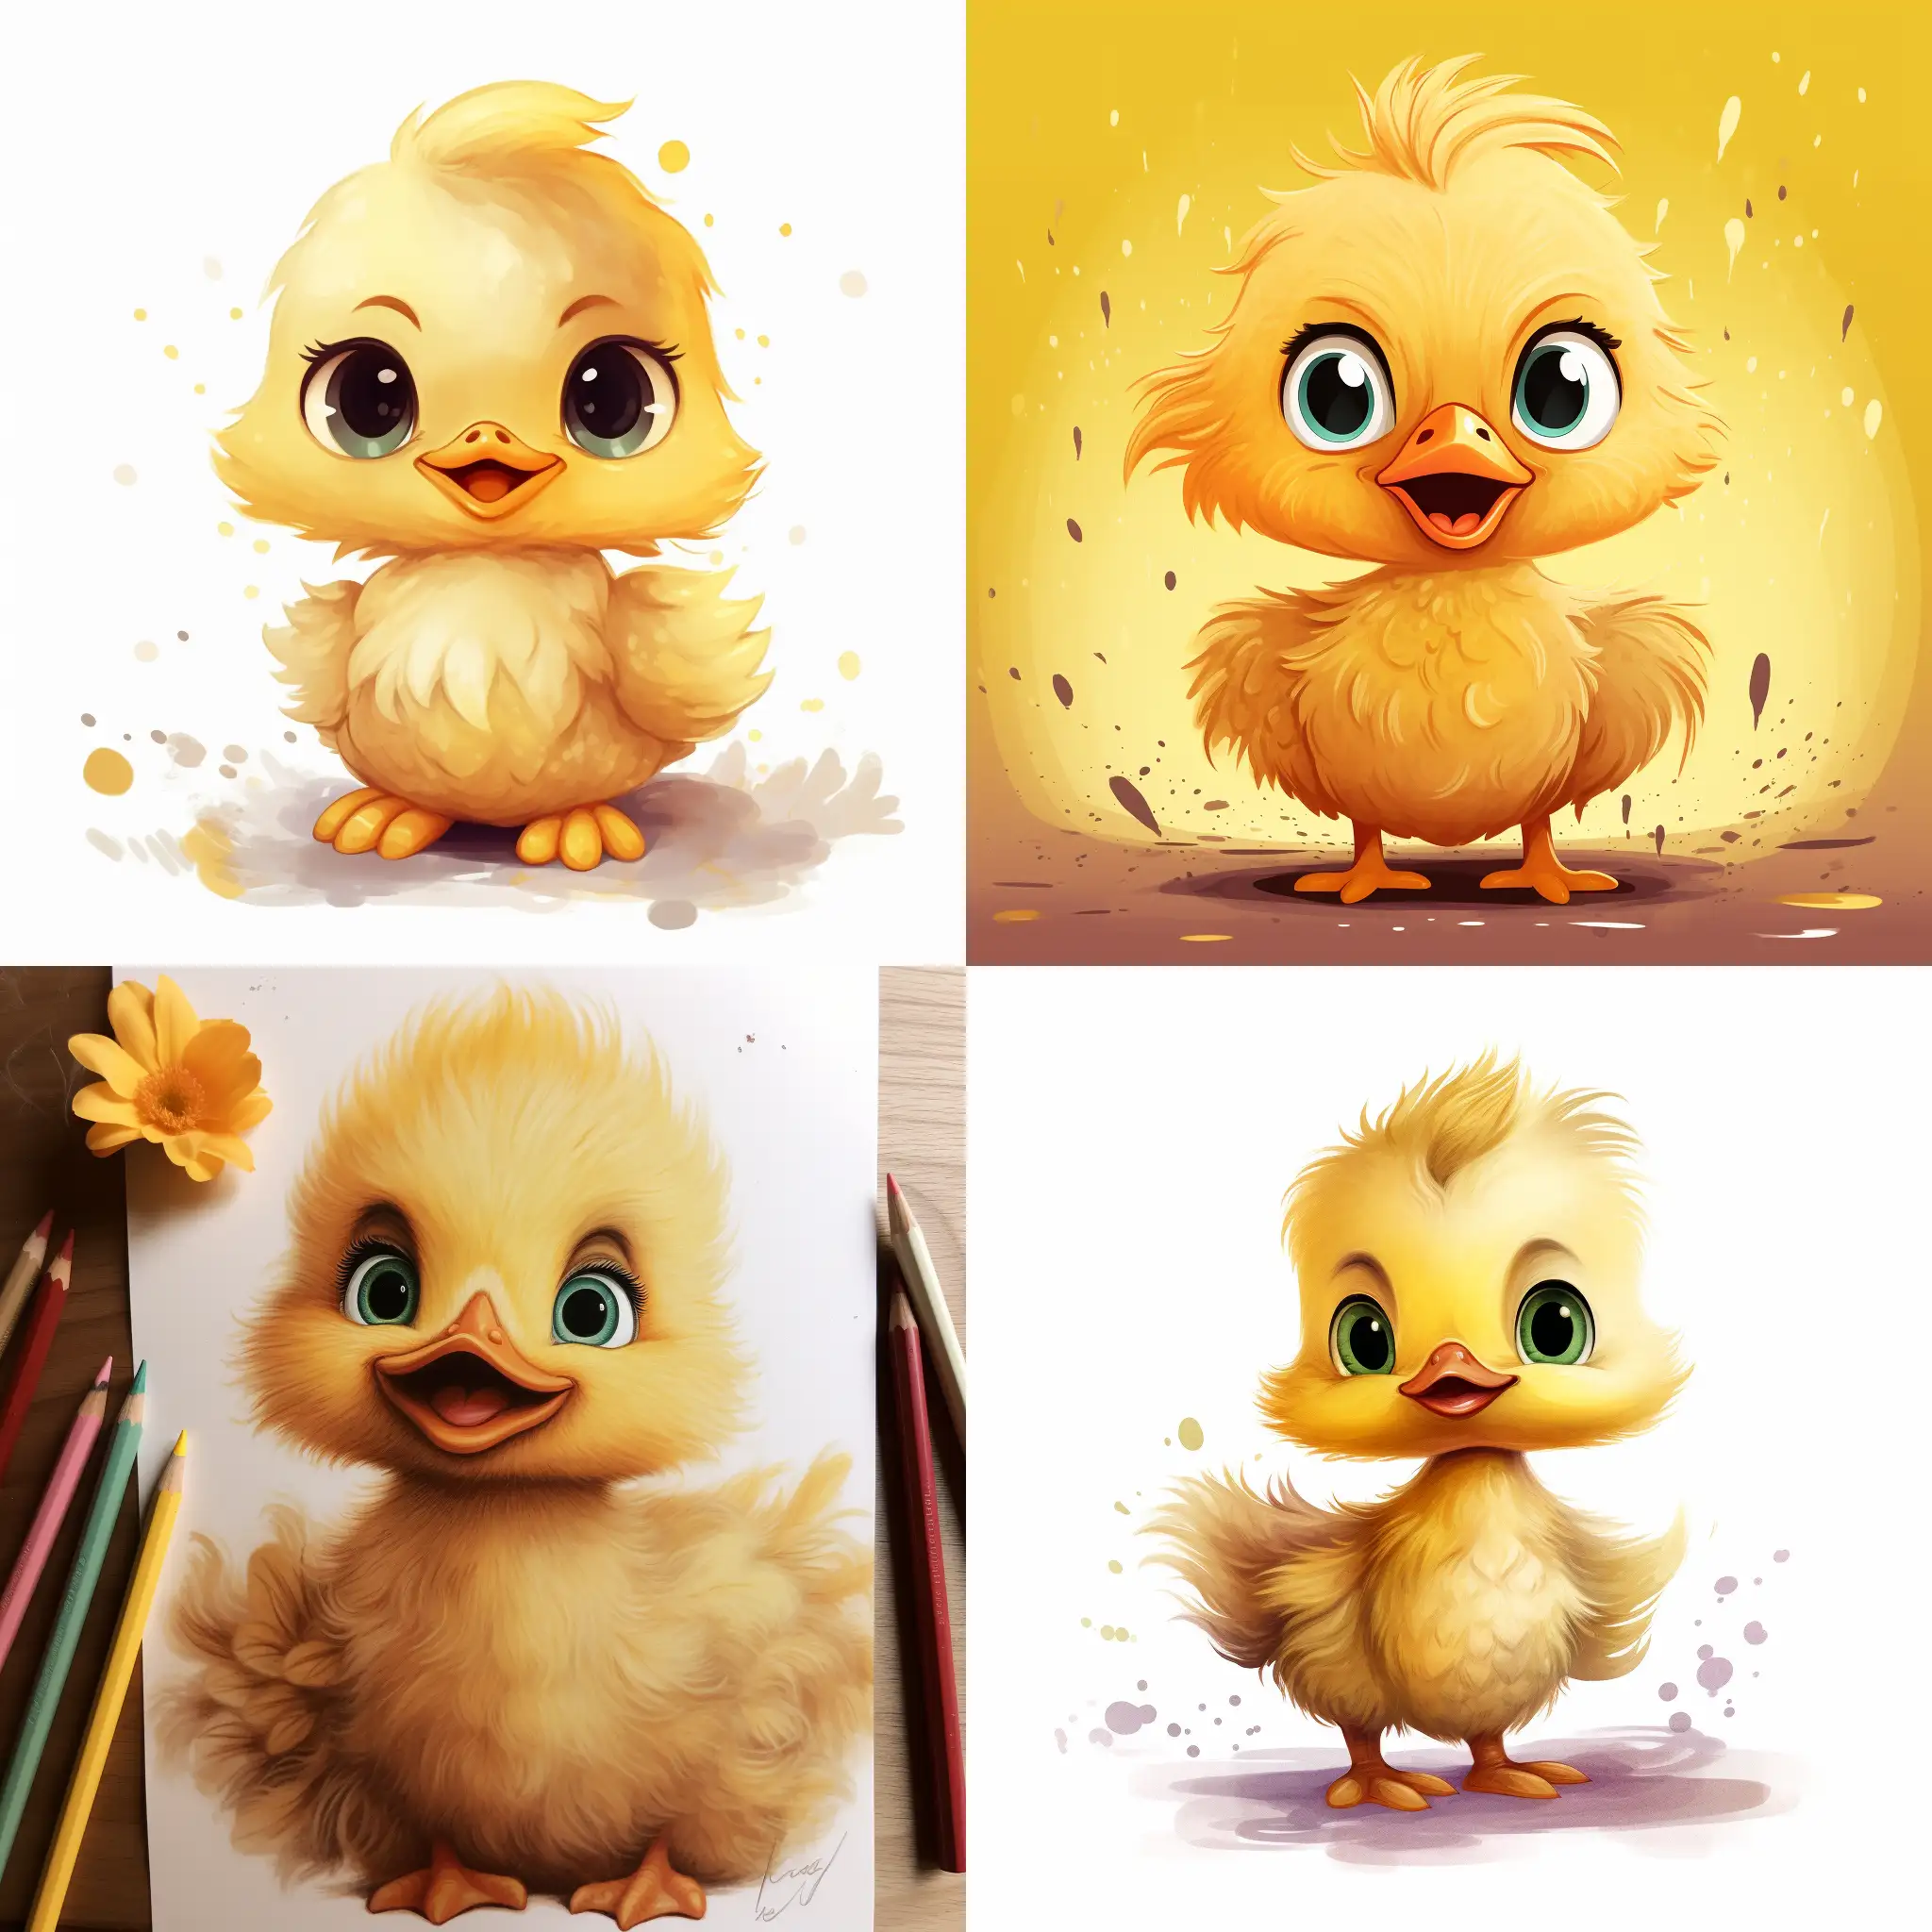 A fluffy yellow duckling, in cartoon style